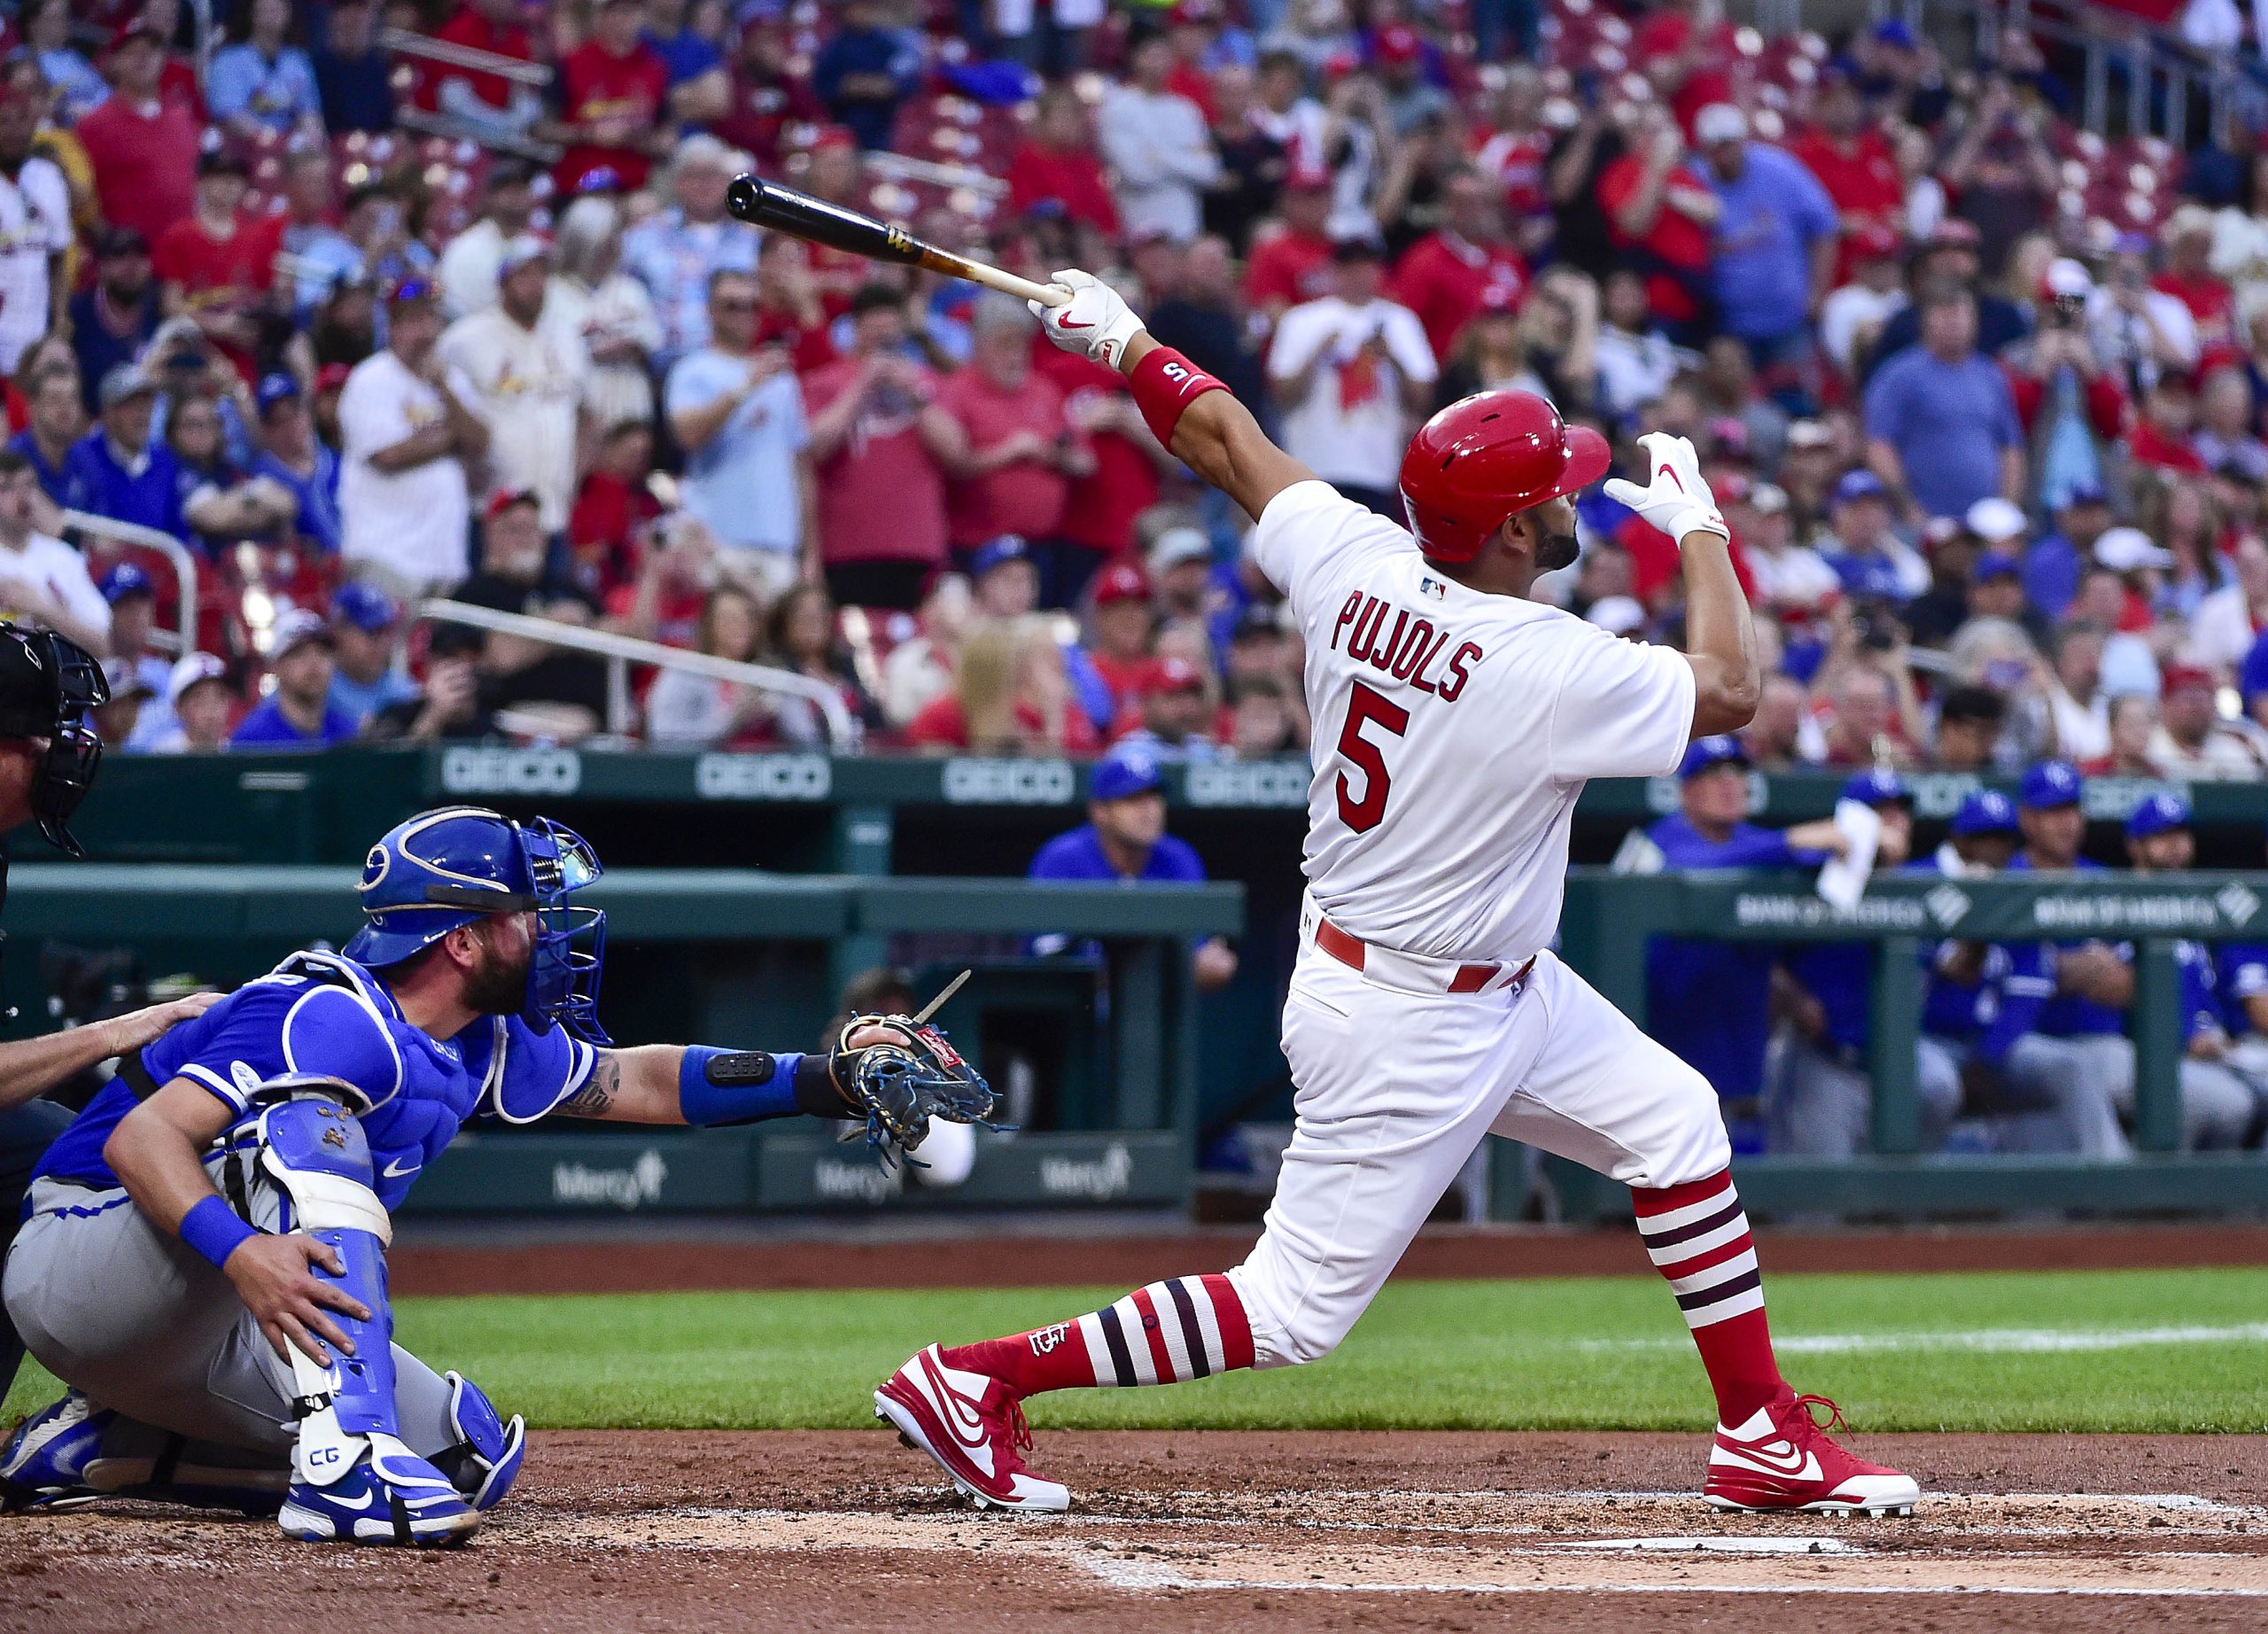 Albert Pujols home run makes Cardinals fans giddy with nostalgia - The Comeback